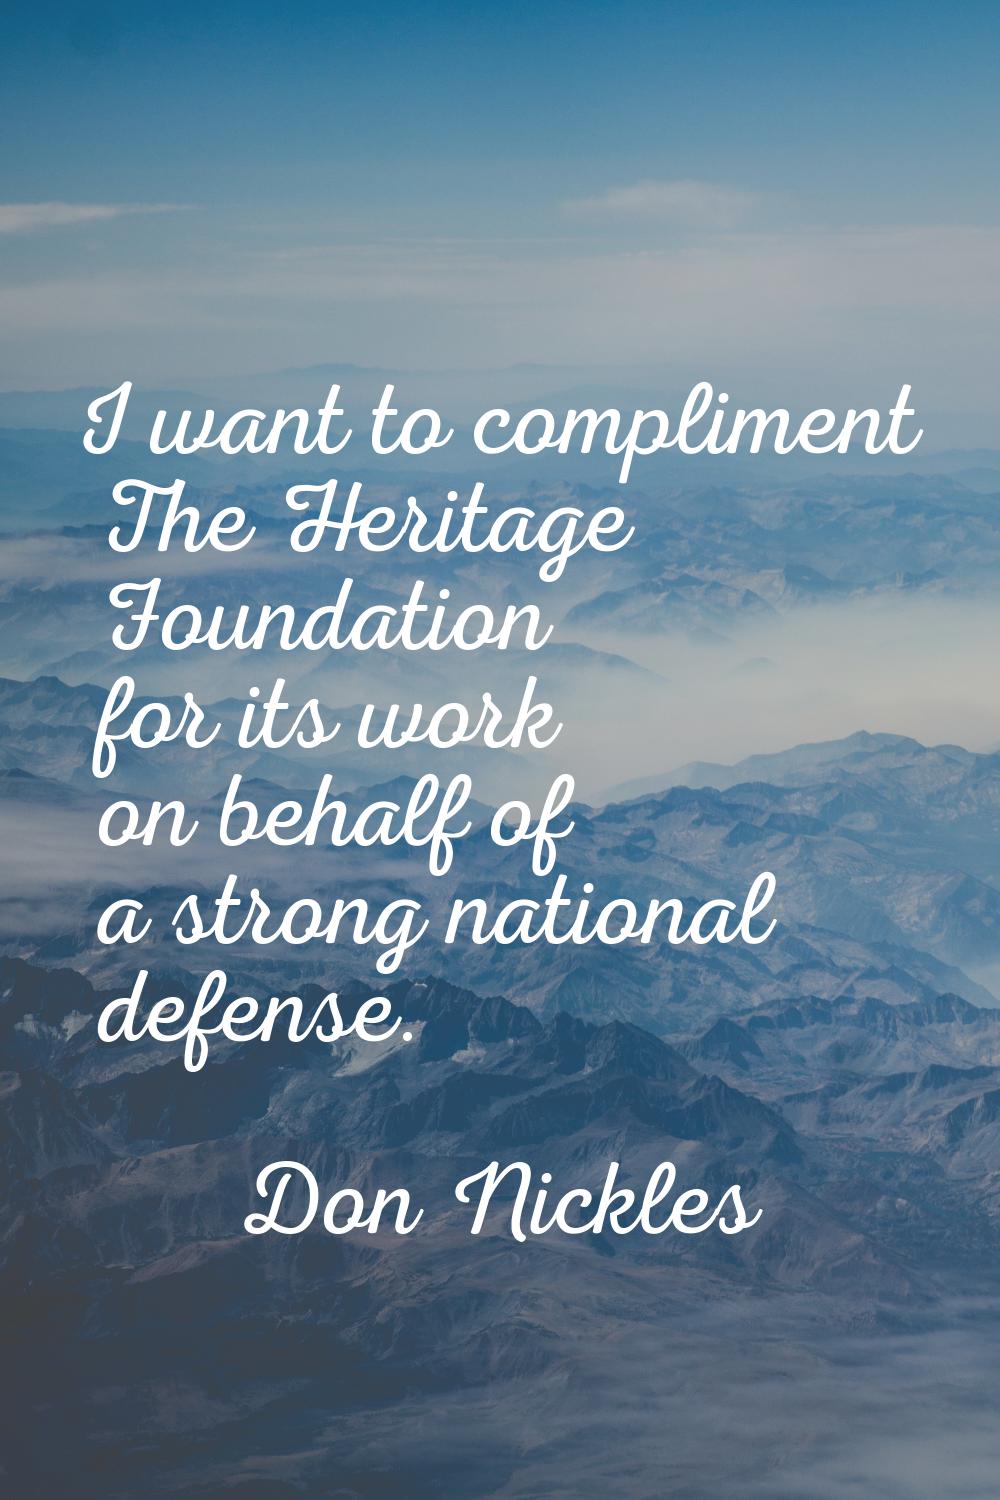 I want to compliment The Heritage Foundation for its work on behalf of a strong national defense.